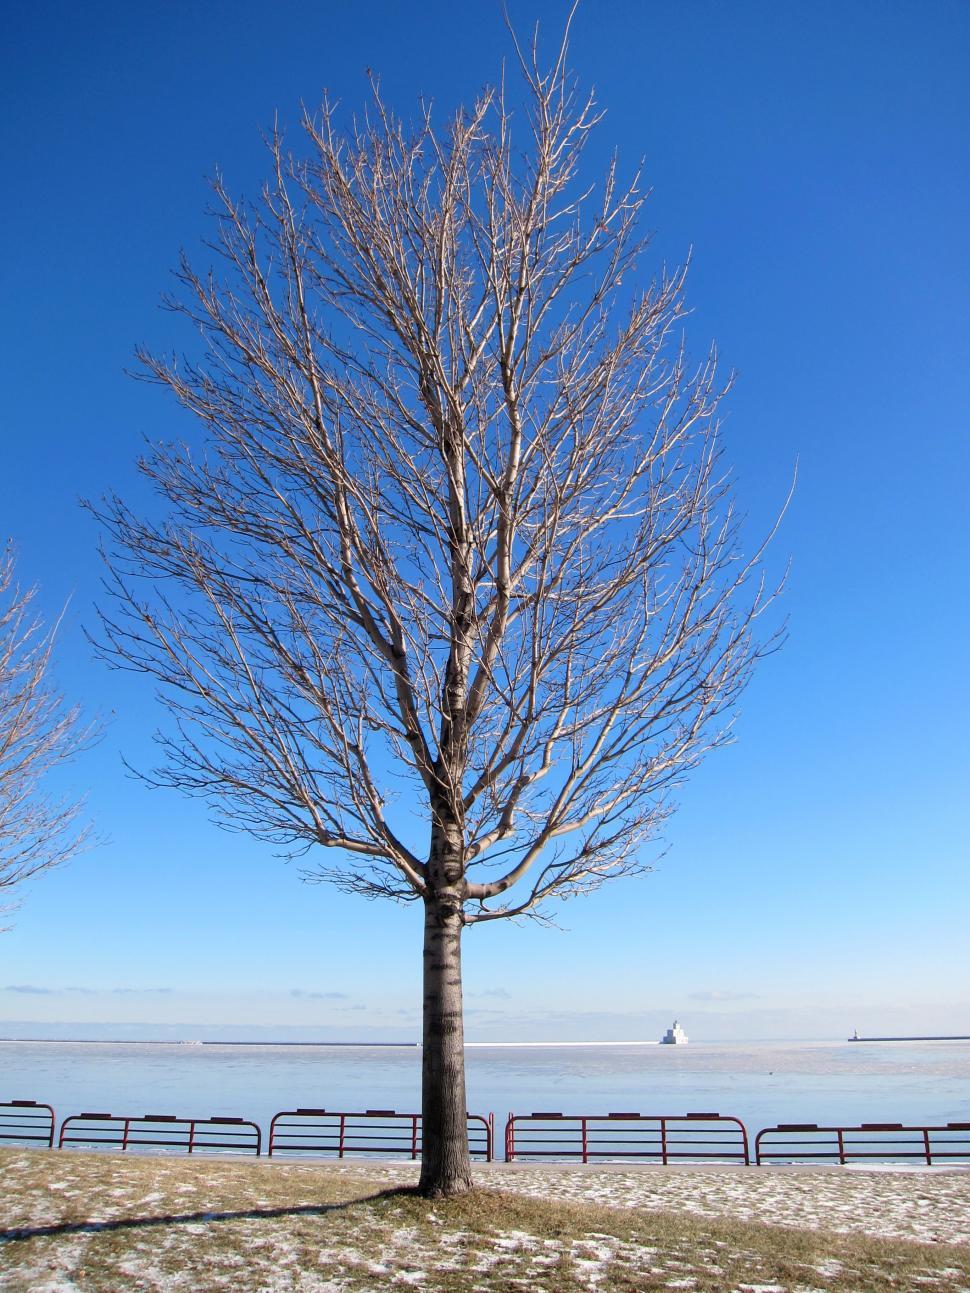 Free Image of Bare Tree Stands in Snow by Water 